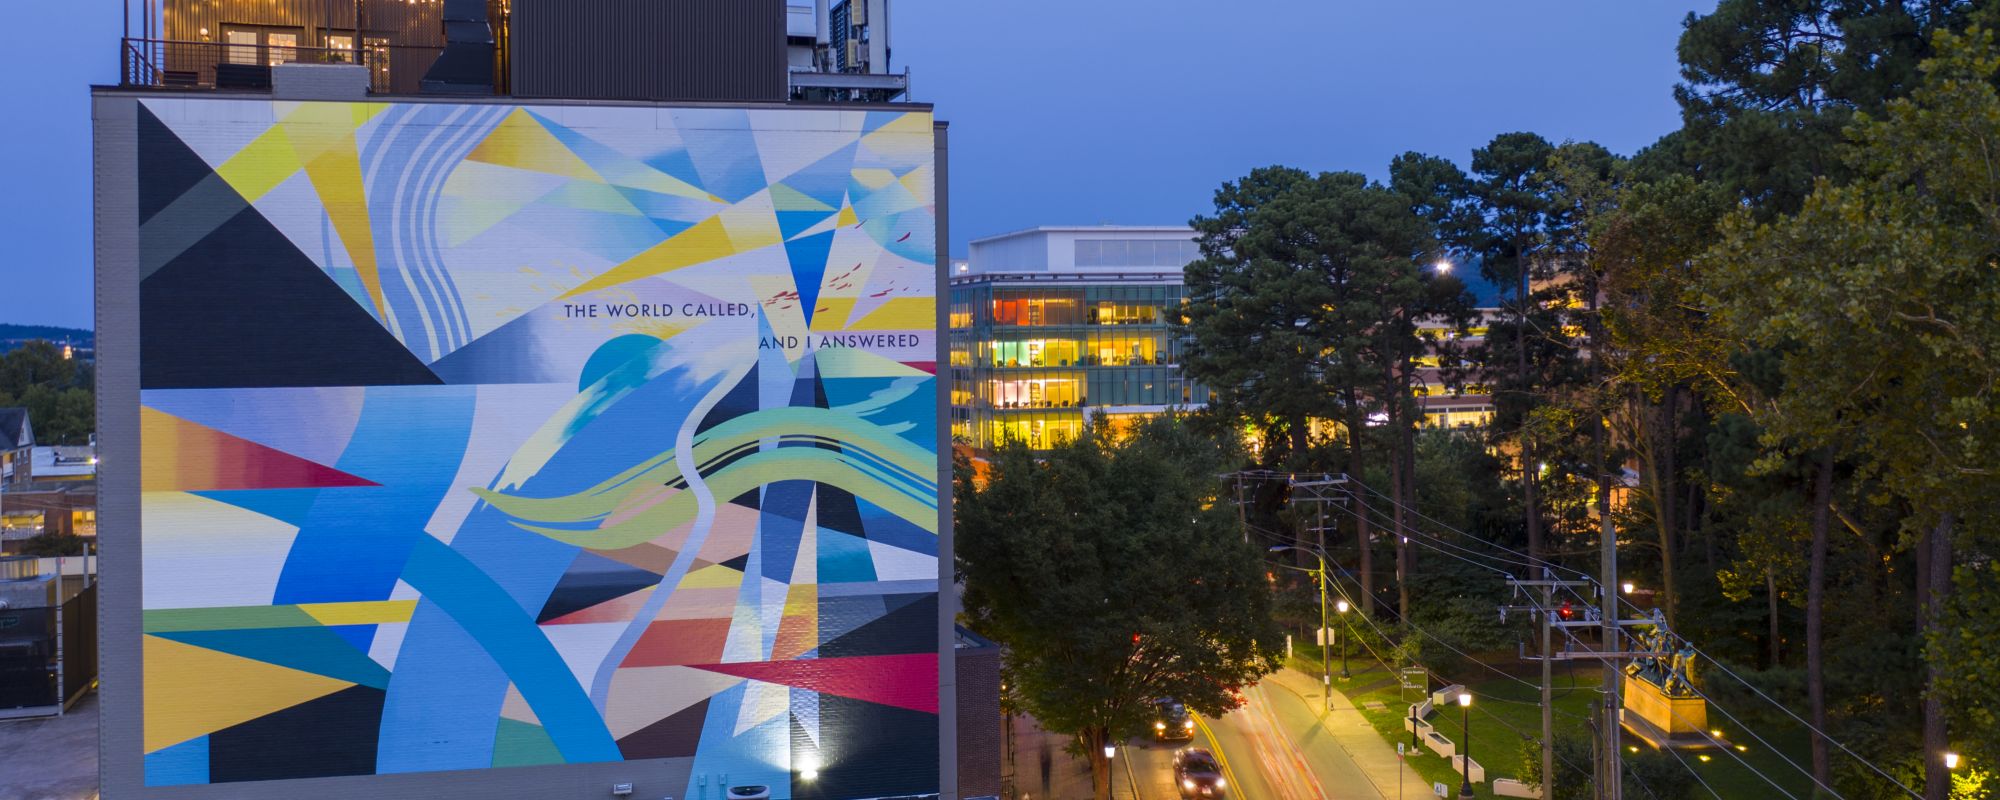 Mural on UVA Corner, features excerpt of Rita Dove Poem "The World Called and I answered"